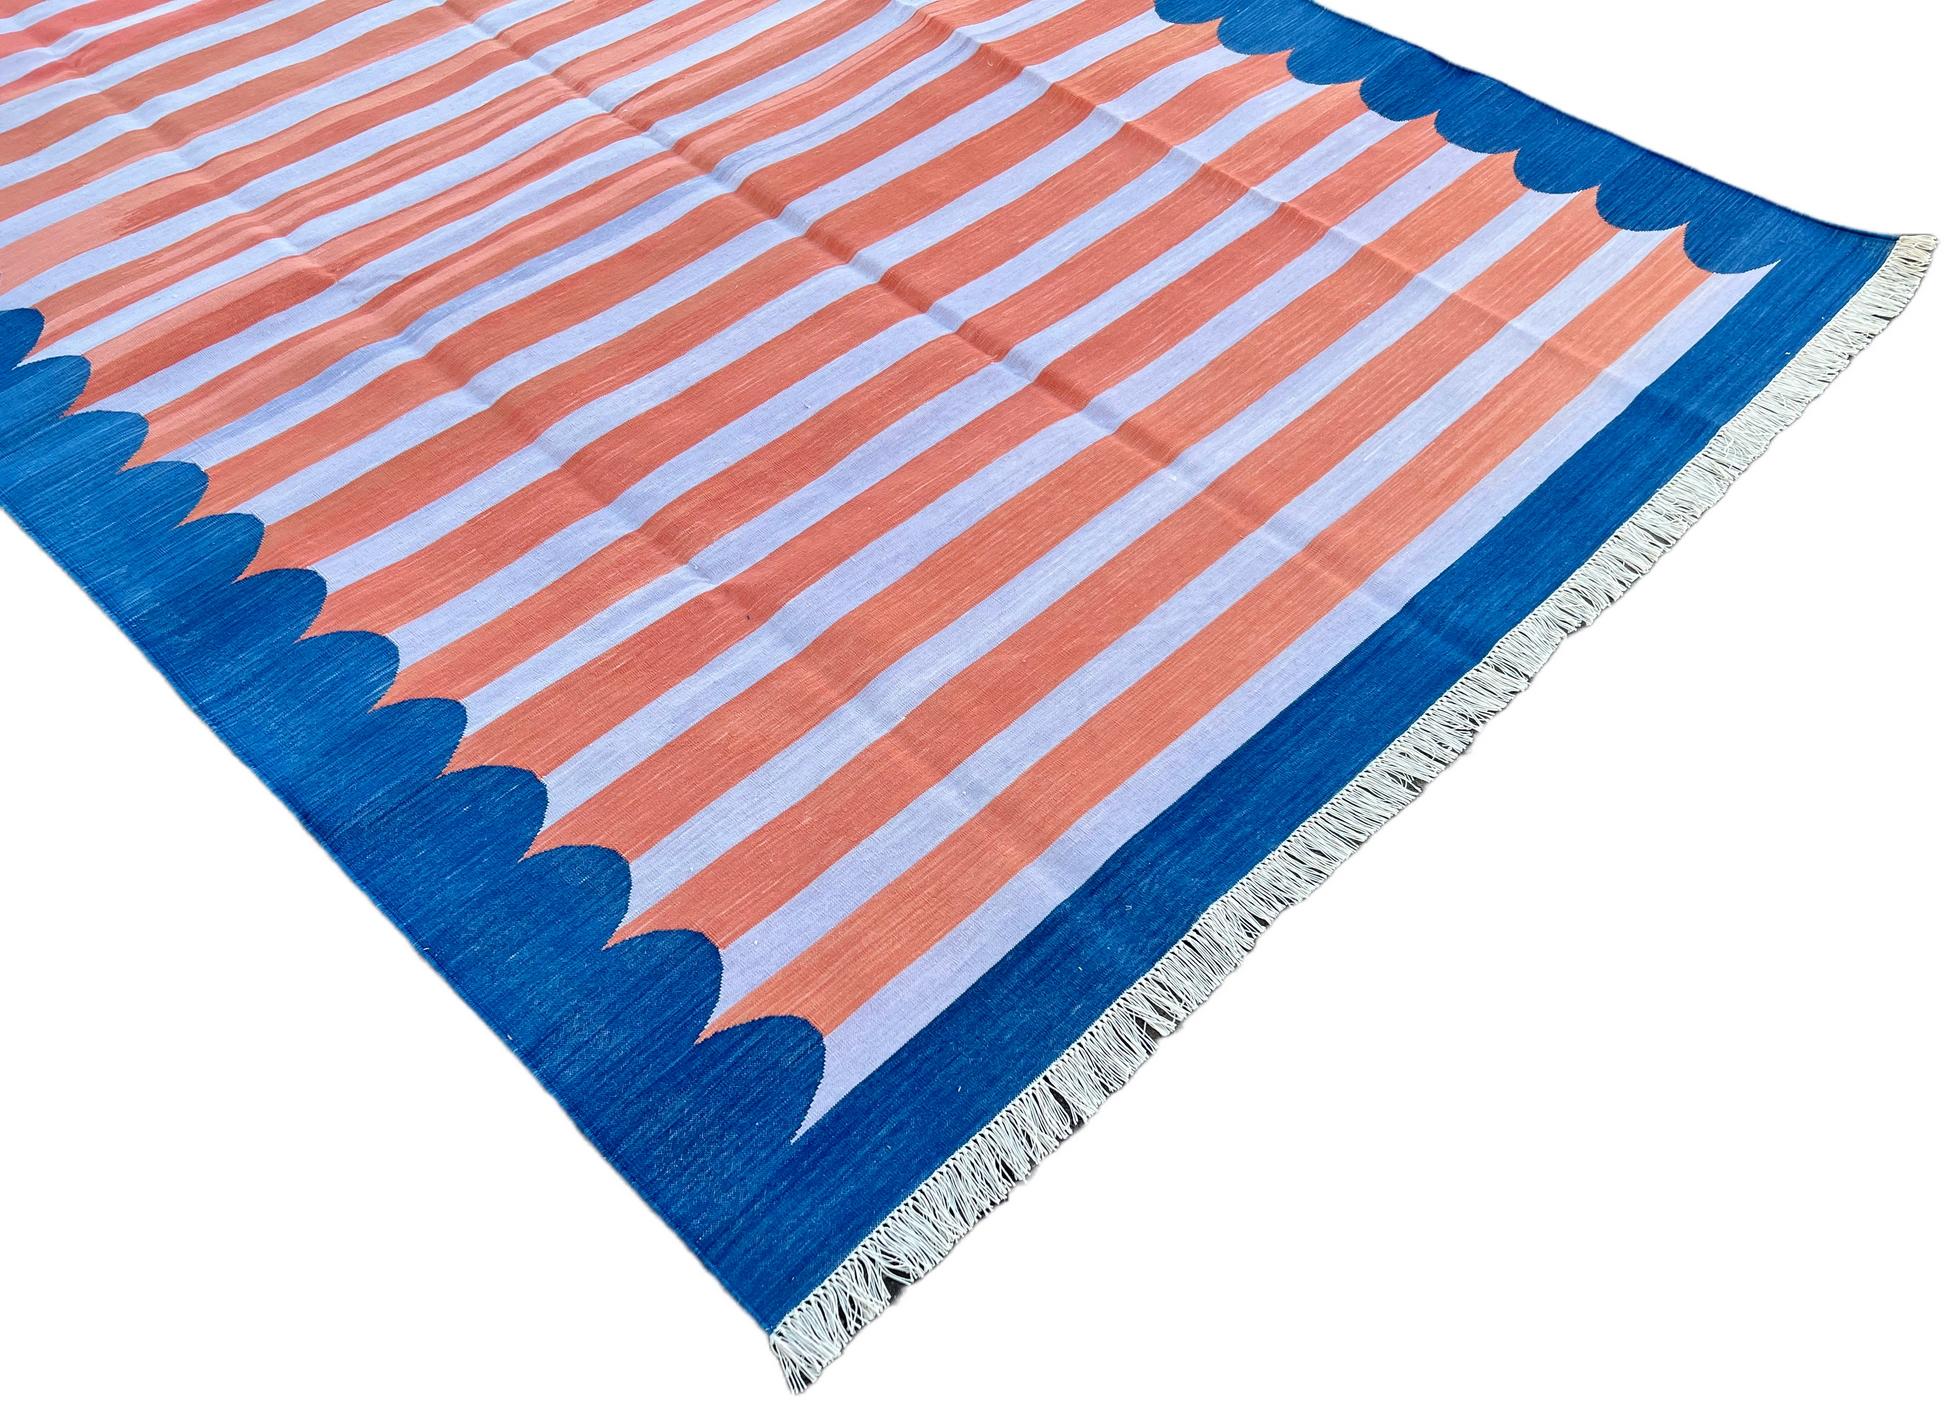 Mid-Century Modern Handmade Cotton Area Flat Weave Rug, 6x9 Coral And Blue Striped Indian Dhurrie For Sale